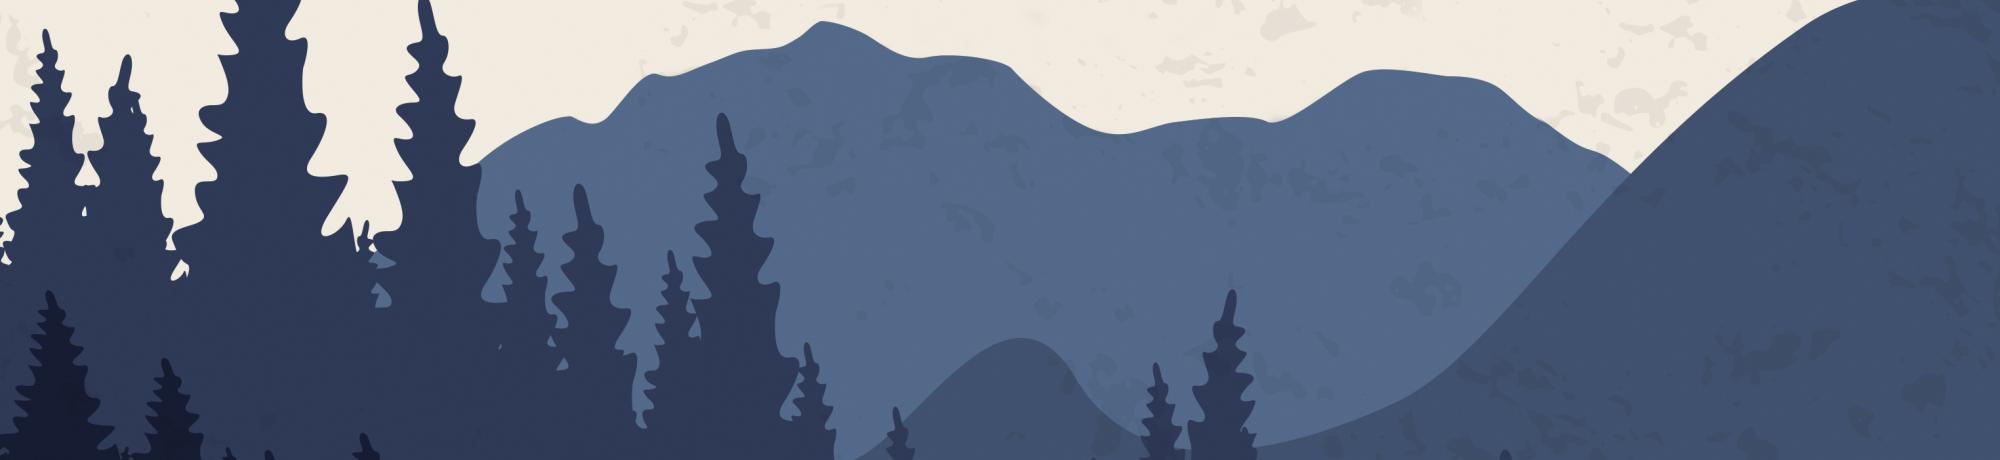 Illustration of forest and mountain range